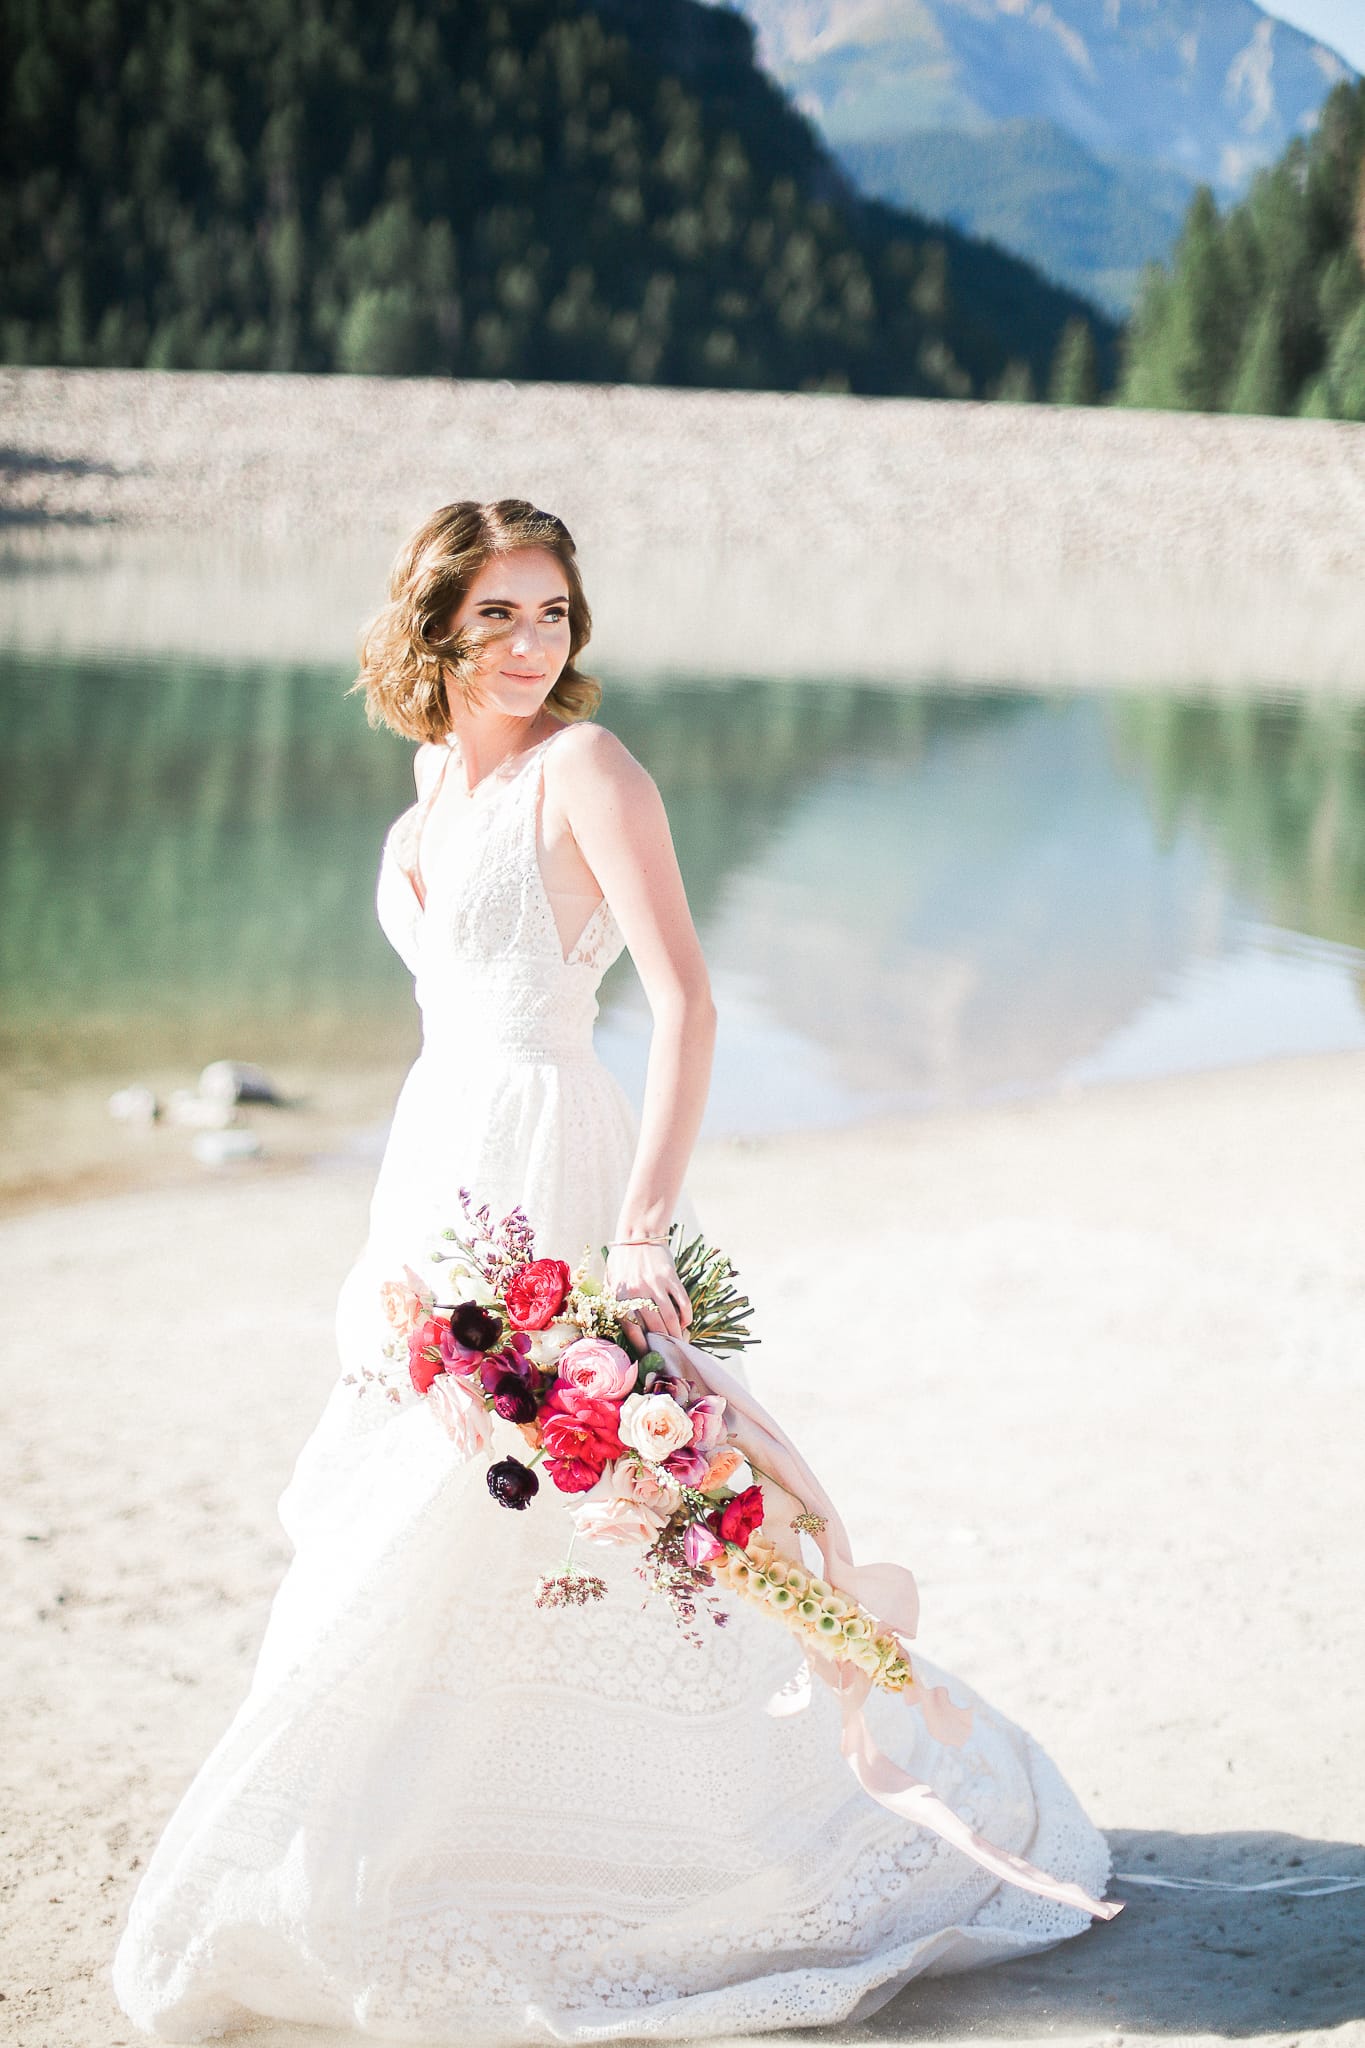 Get Inspired With This Boho Styled Shoot For A Lakeside Elopment